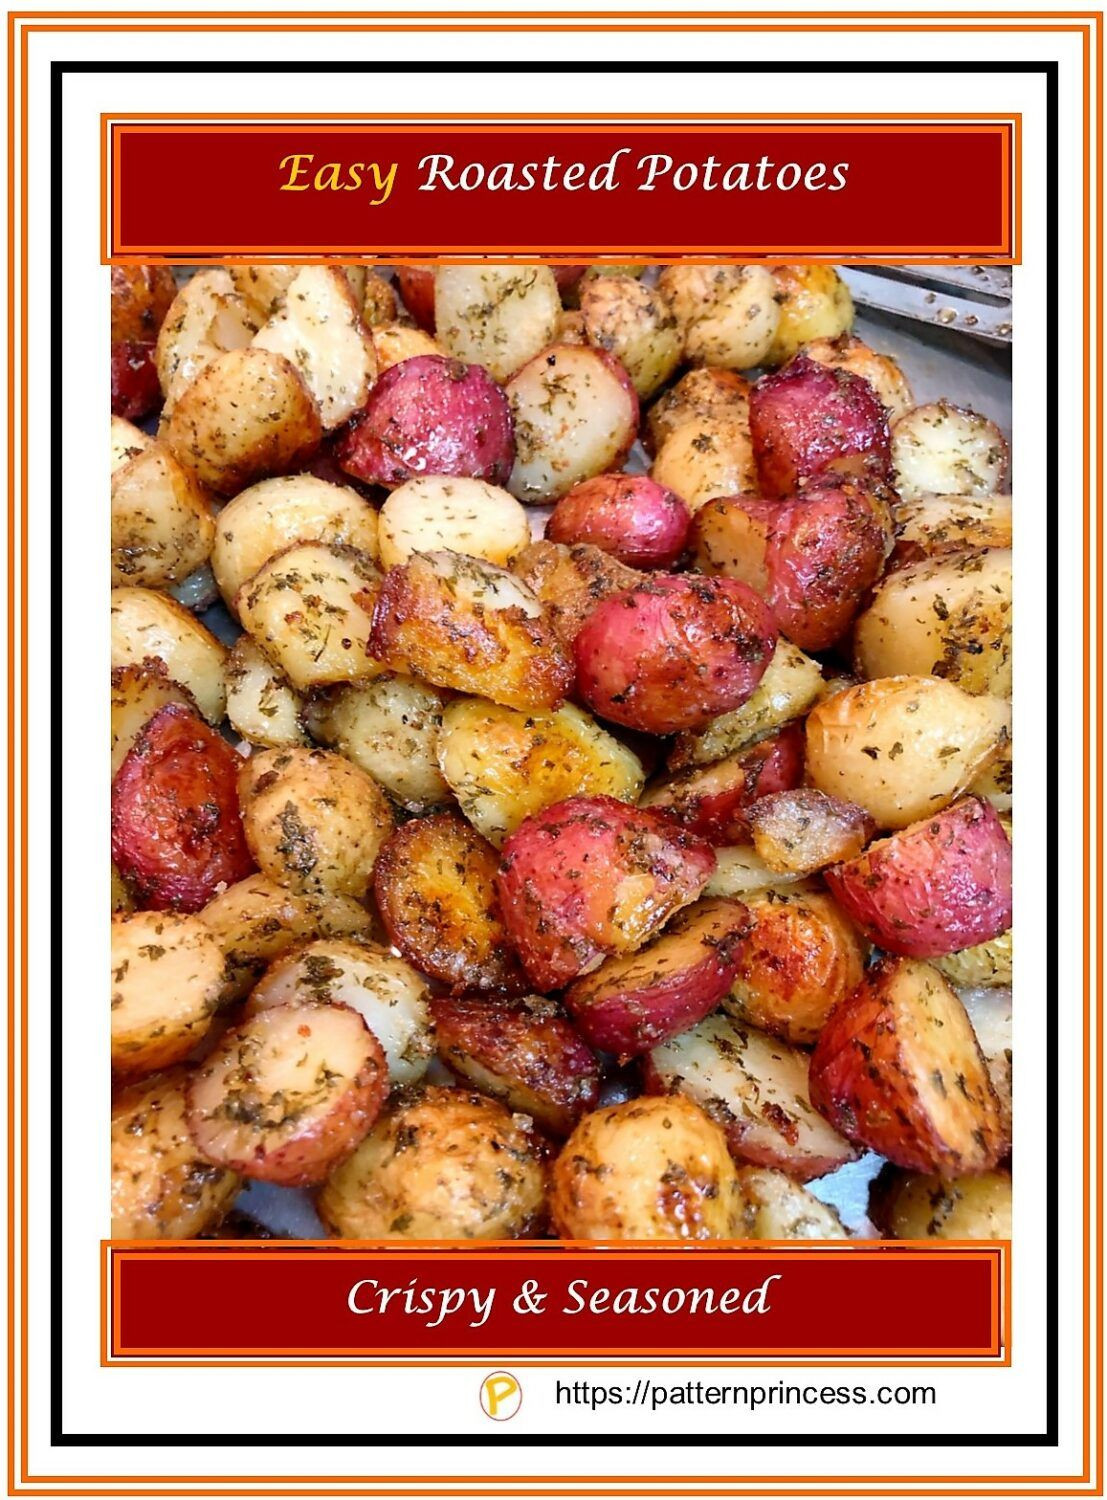 Microwave Red Potato Recipes
 Easy Roasted Potatoes Pattern Princess